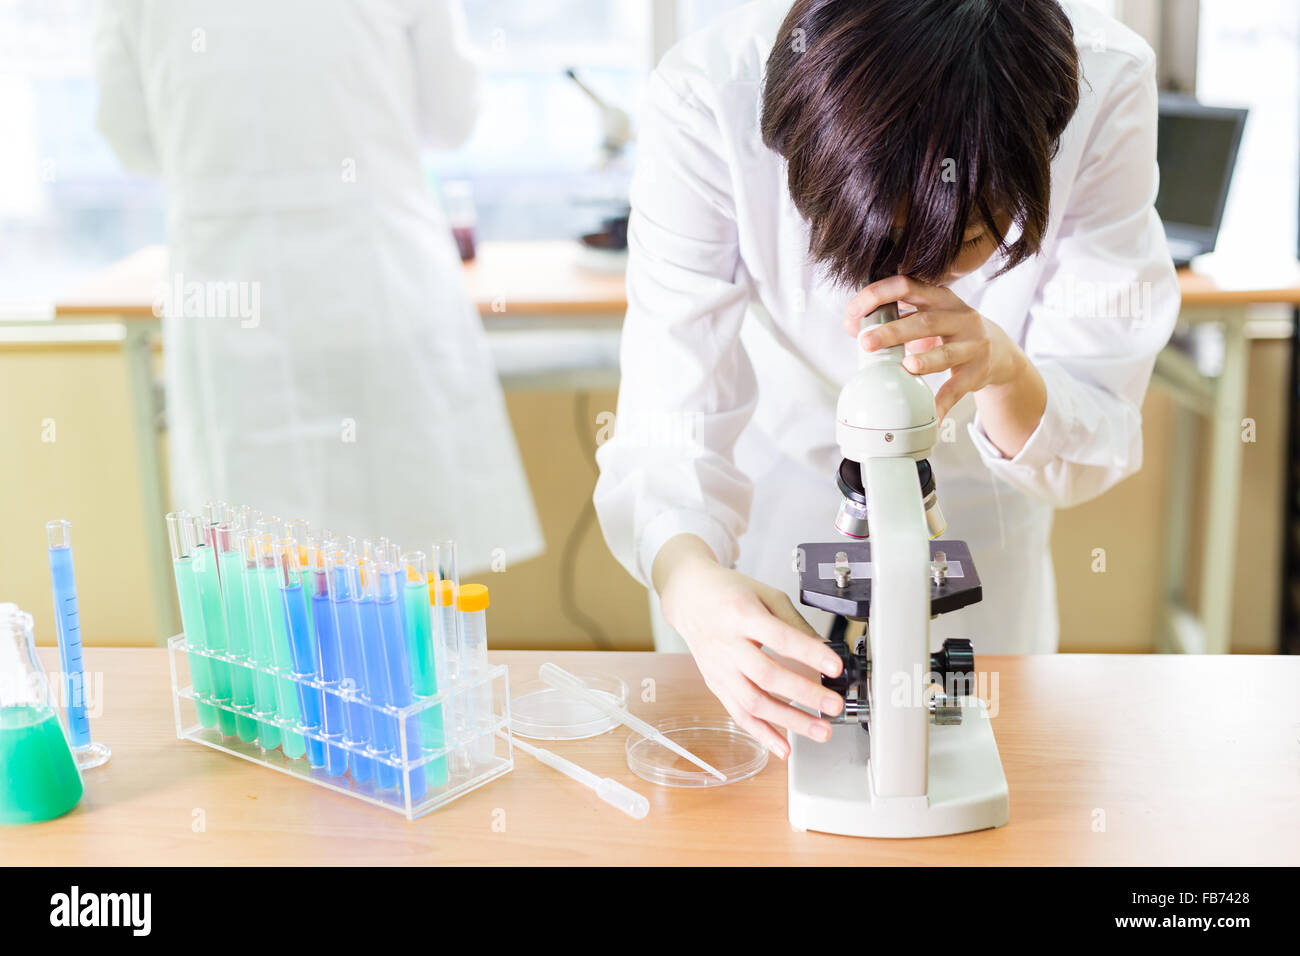 Female Chinese scientist looking into a microscope Stock Photo